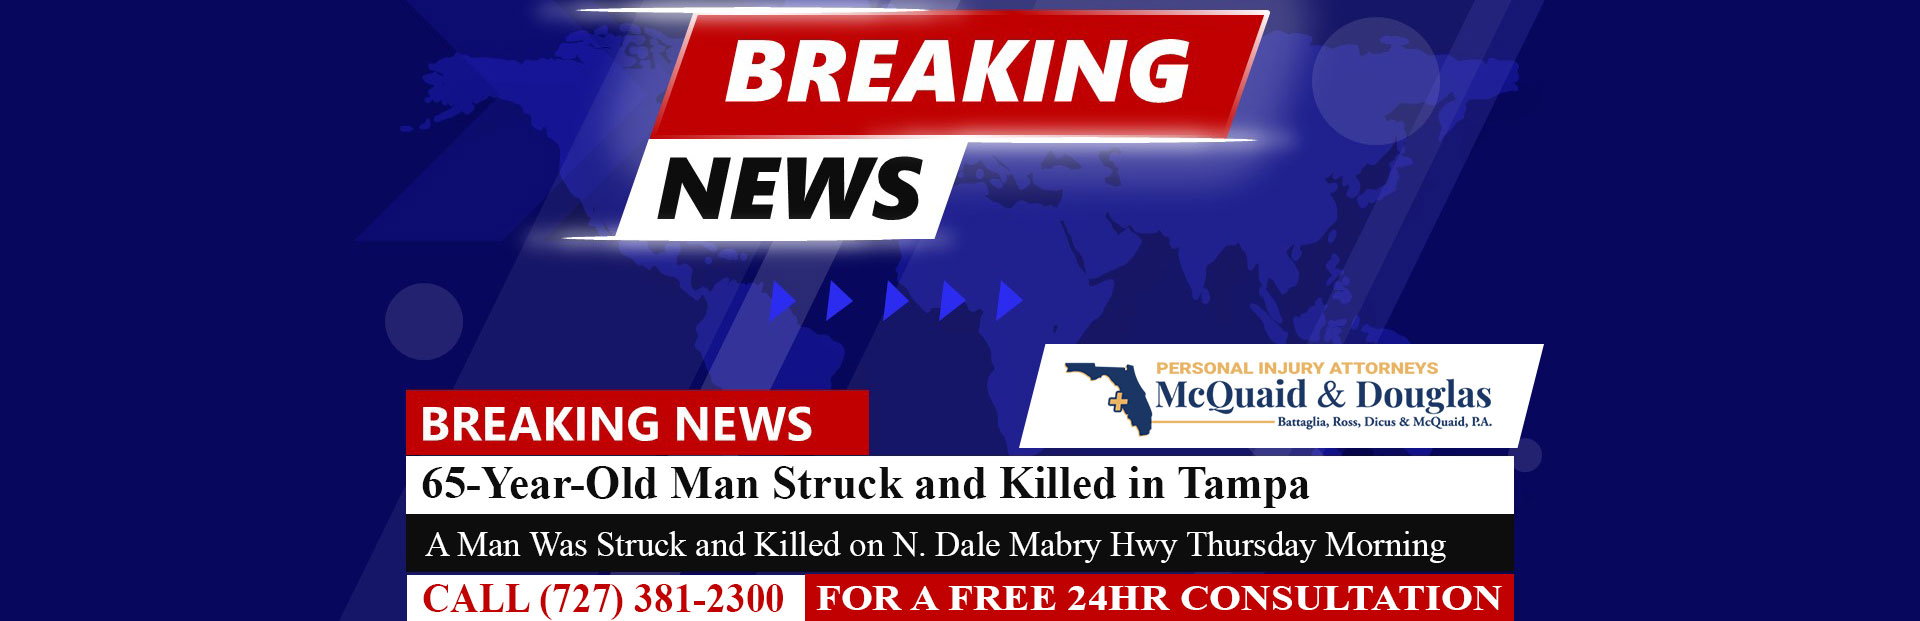 [06-24-23] 65-Year-Old Man Struck and Killed on Dale Mabry Hwy in Tampa Thursday